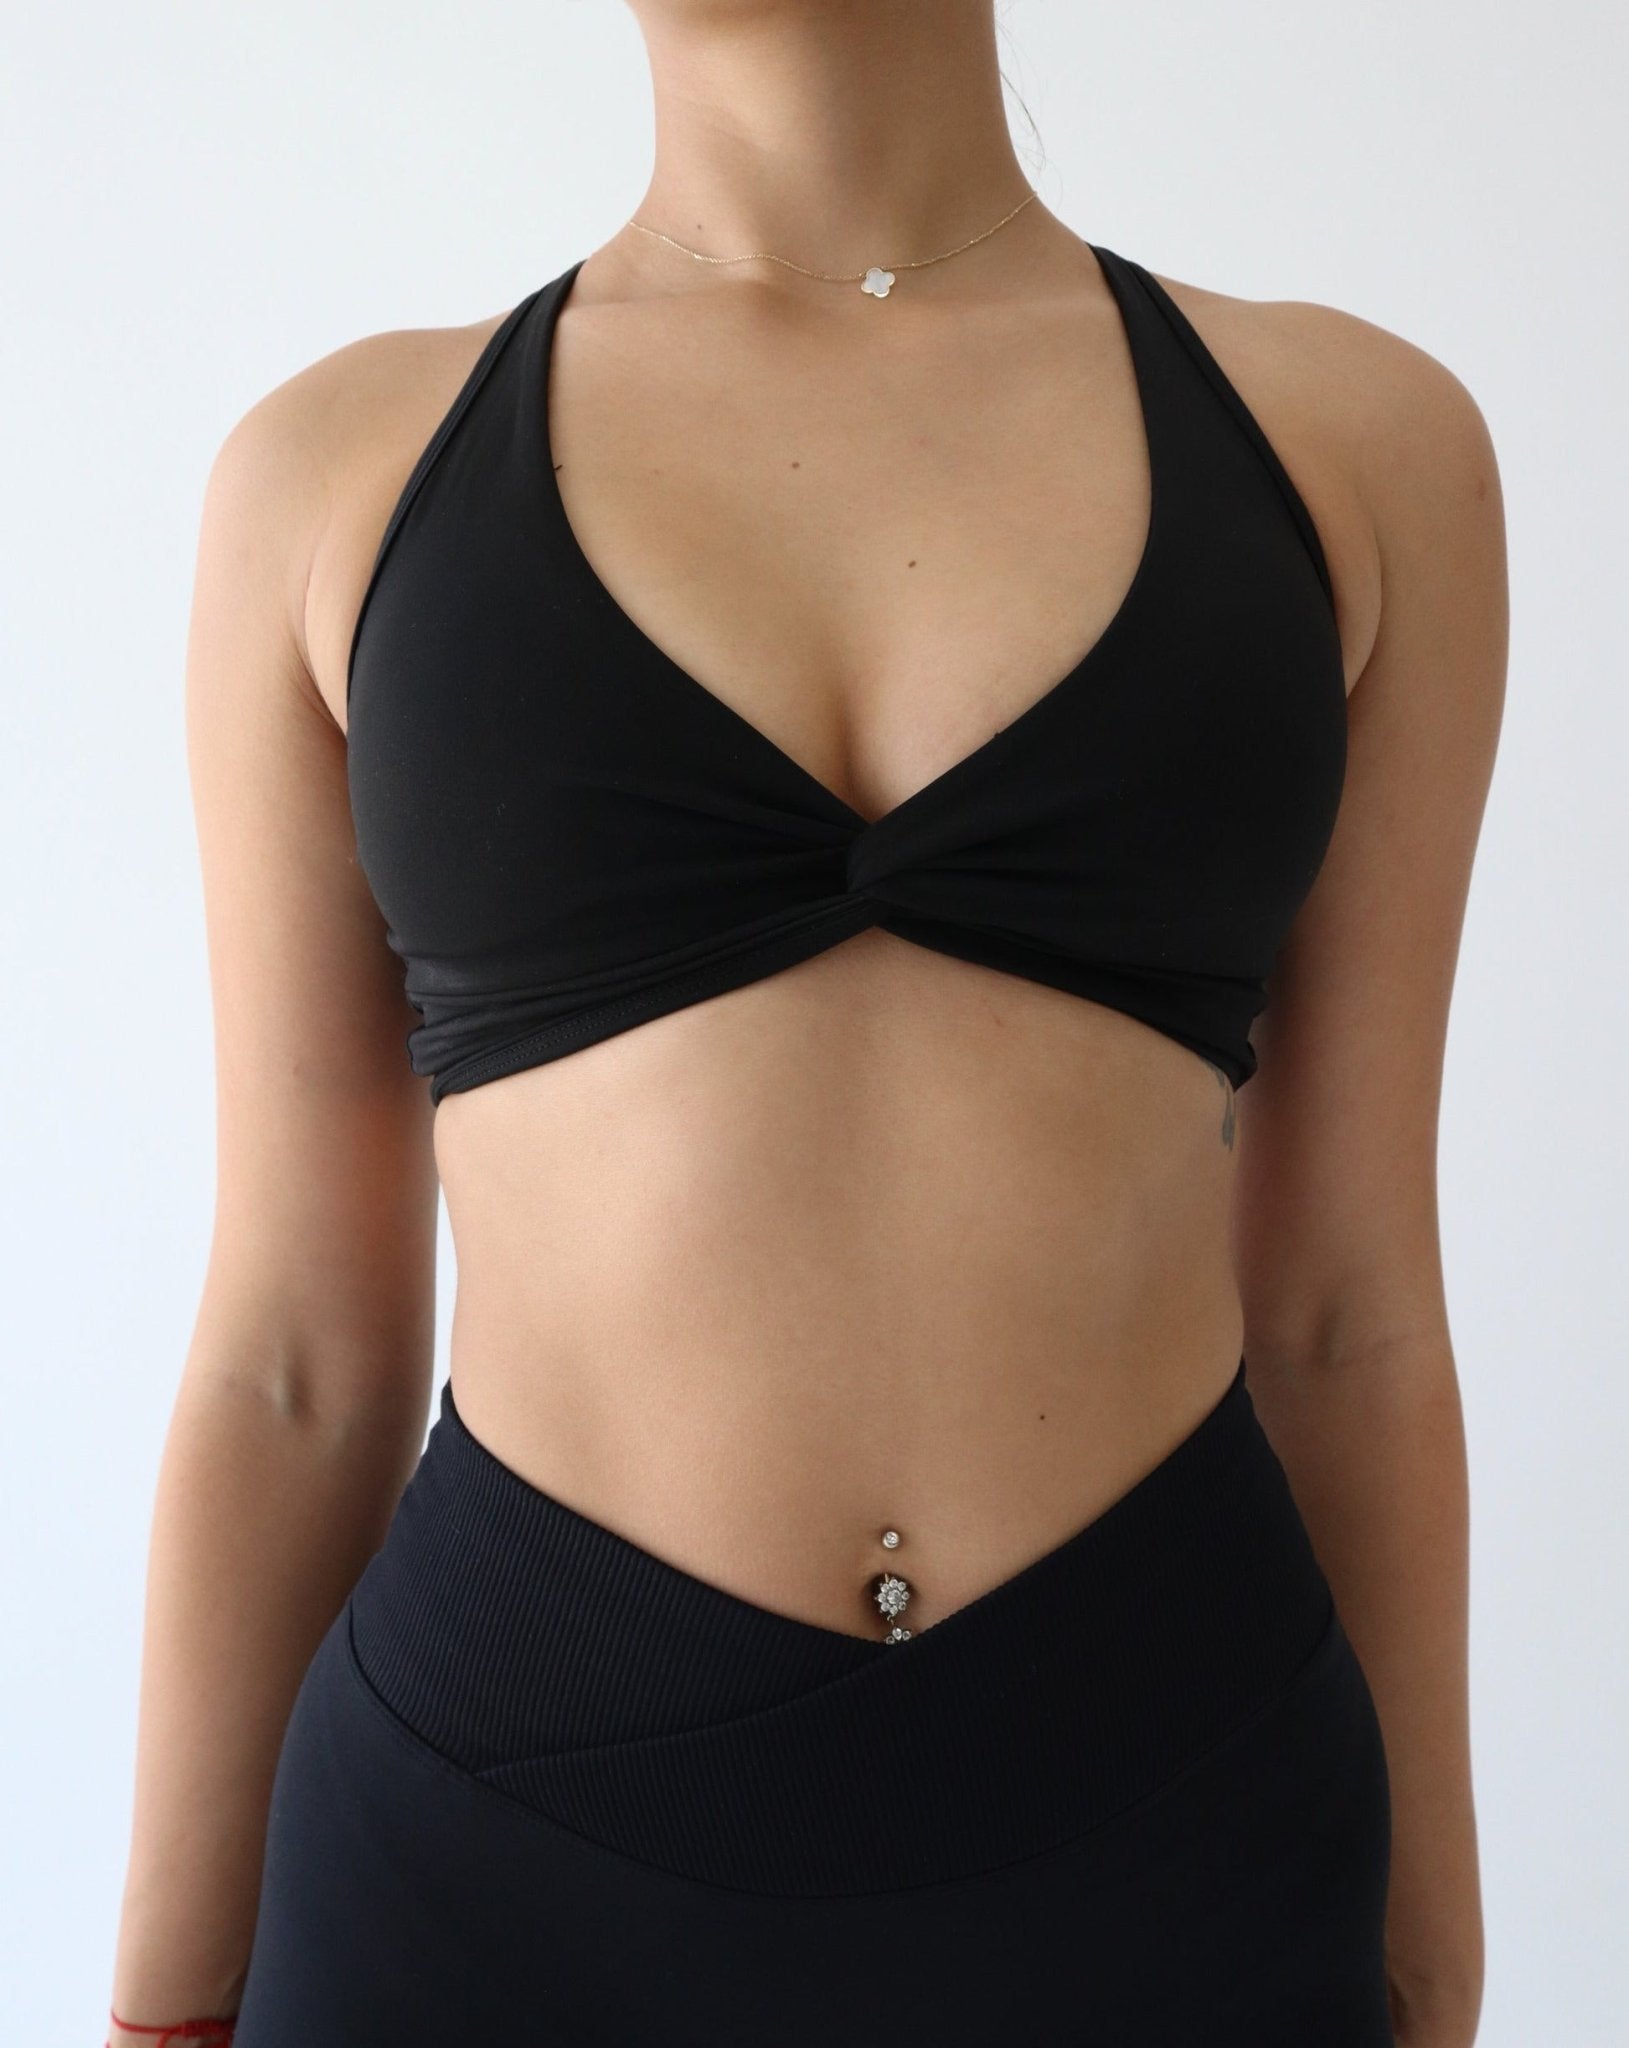 Plunge Medium Hold Sports Bra - BLACK - LIBERA Fitness Apparel. Discover the Enhance Medium Hold Sports Bra, designed for maximum support and comfort. Featuring an elegant twist design and adjustable straps, it's perfect for high-impact workouts.